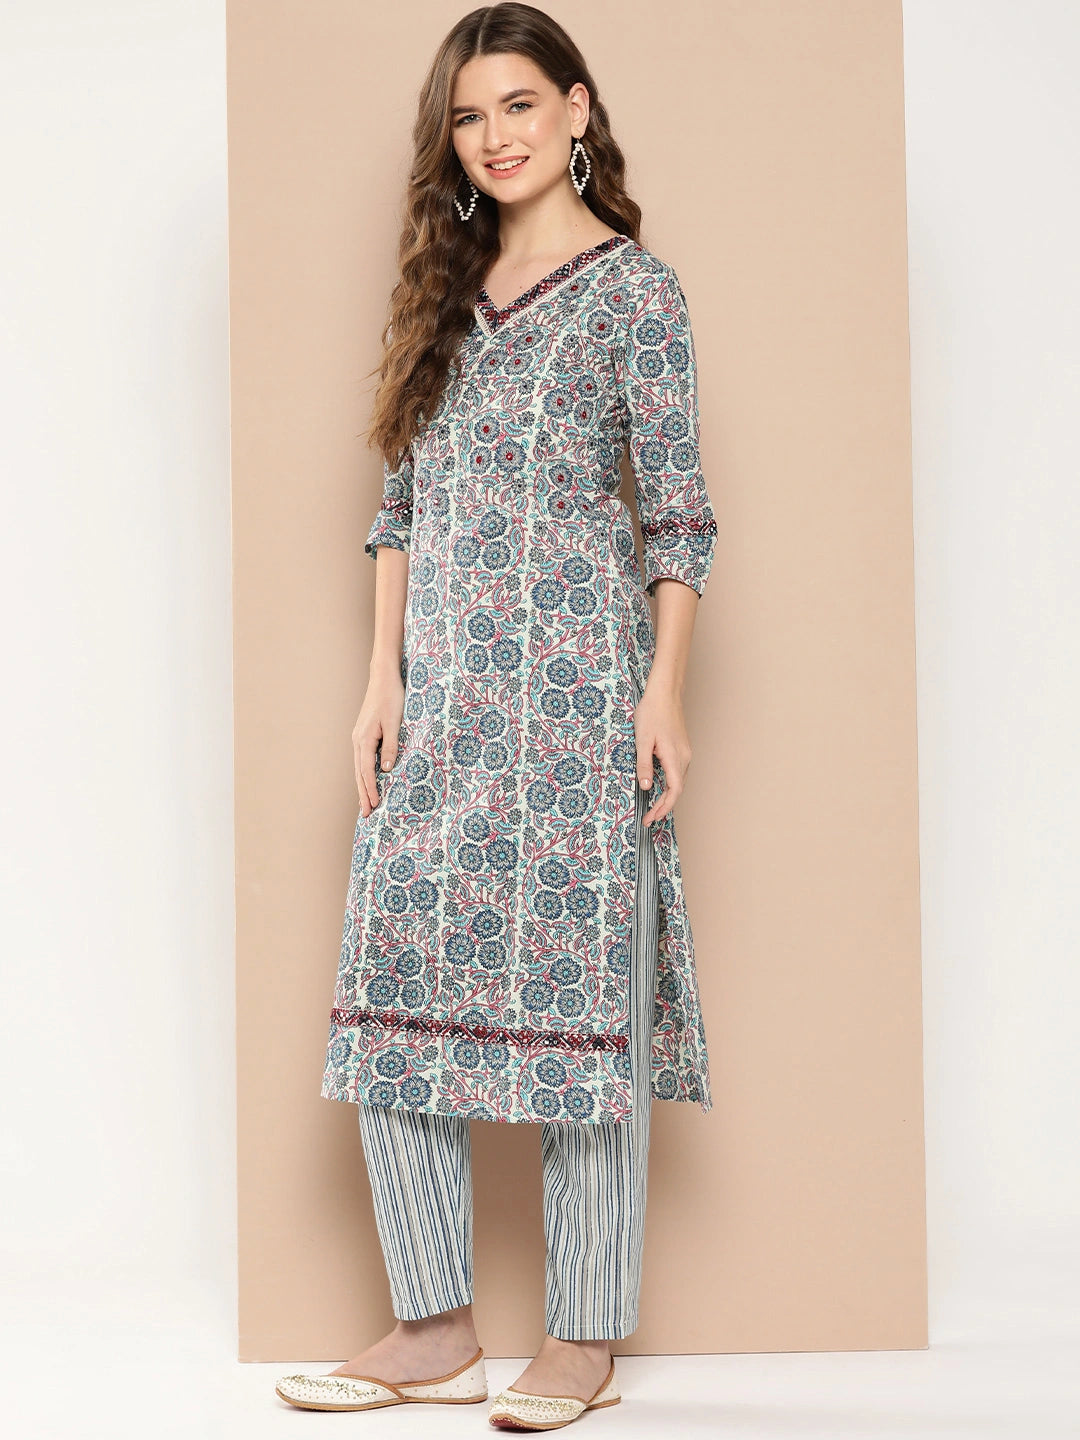 Off-White Floral Printed Pure Cotton Kurta With Trouser And Dupatta-Yufta Store-1372SKDBLS